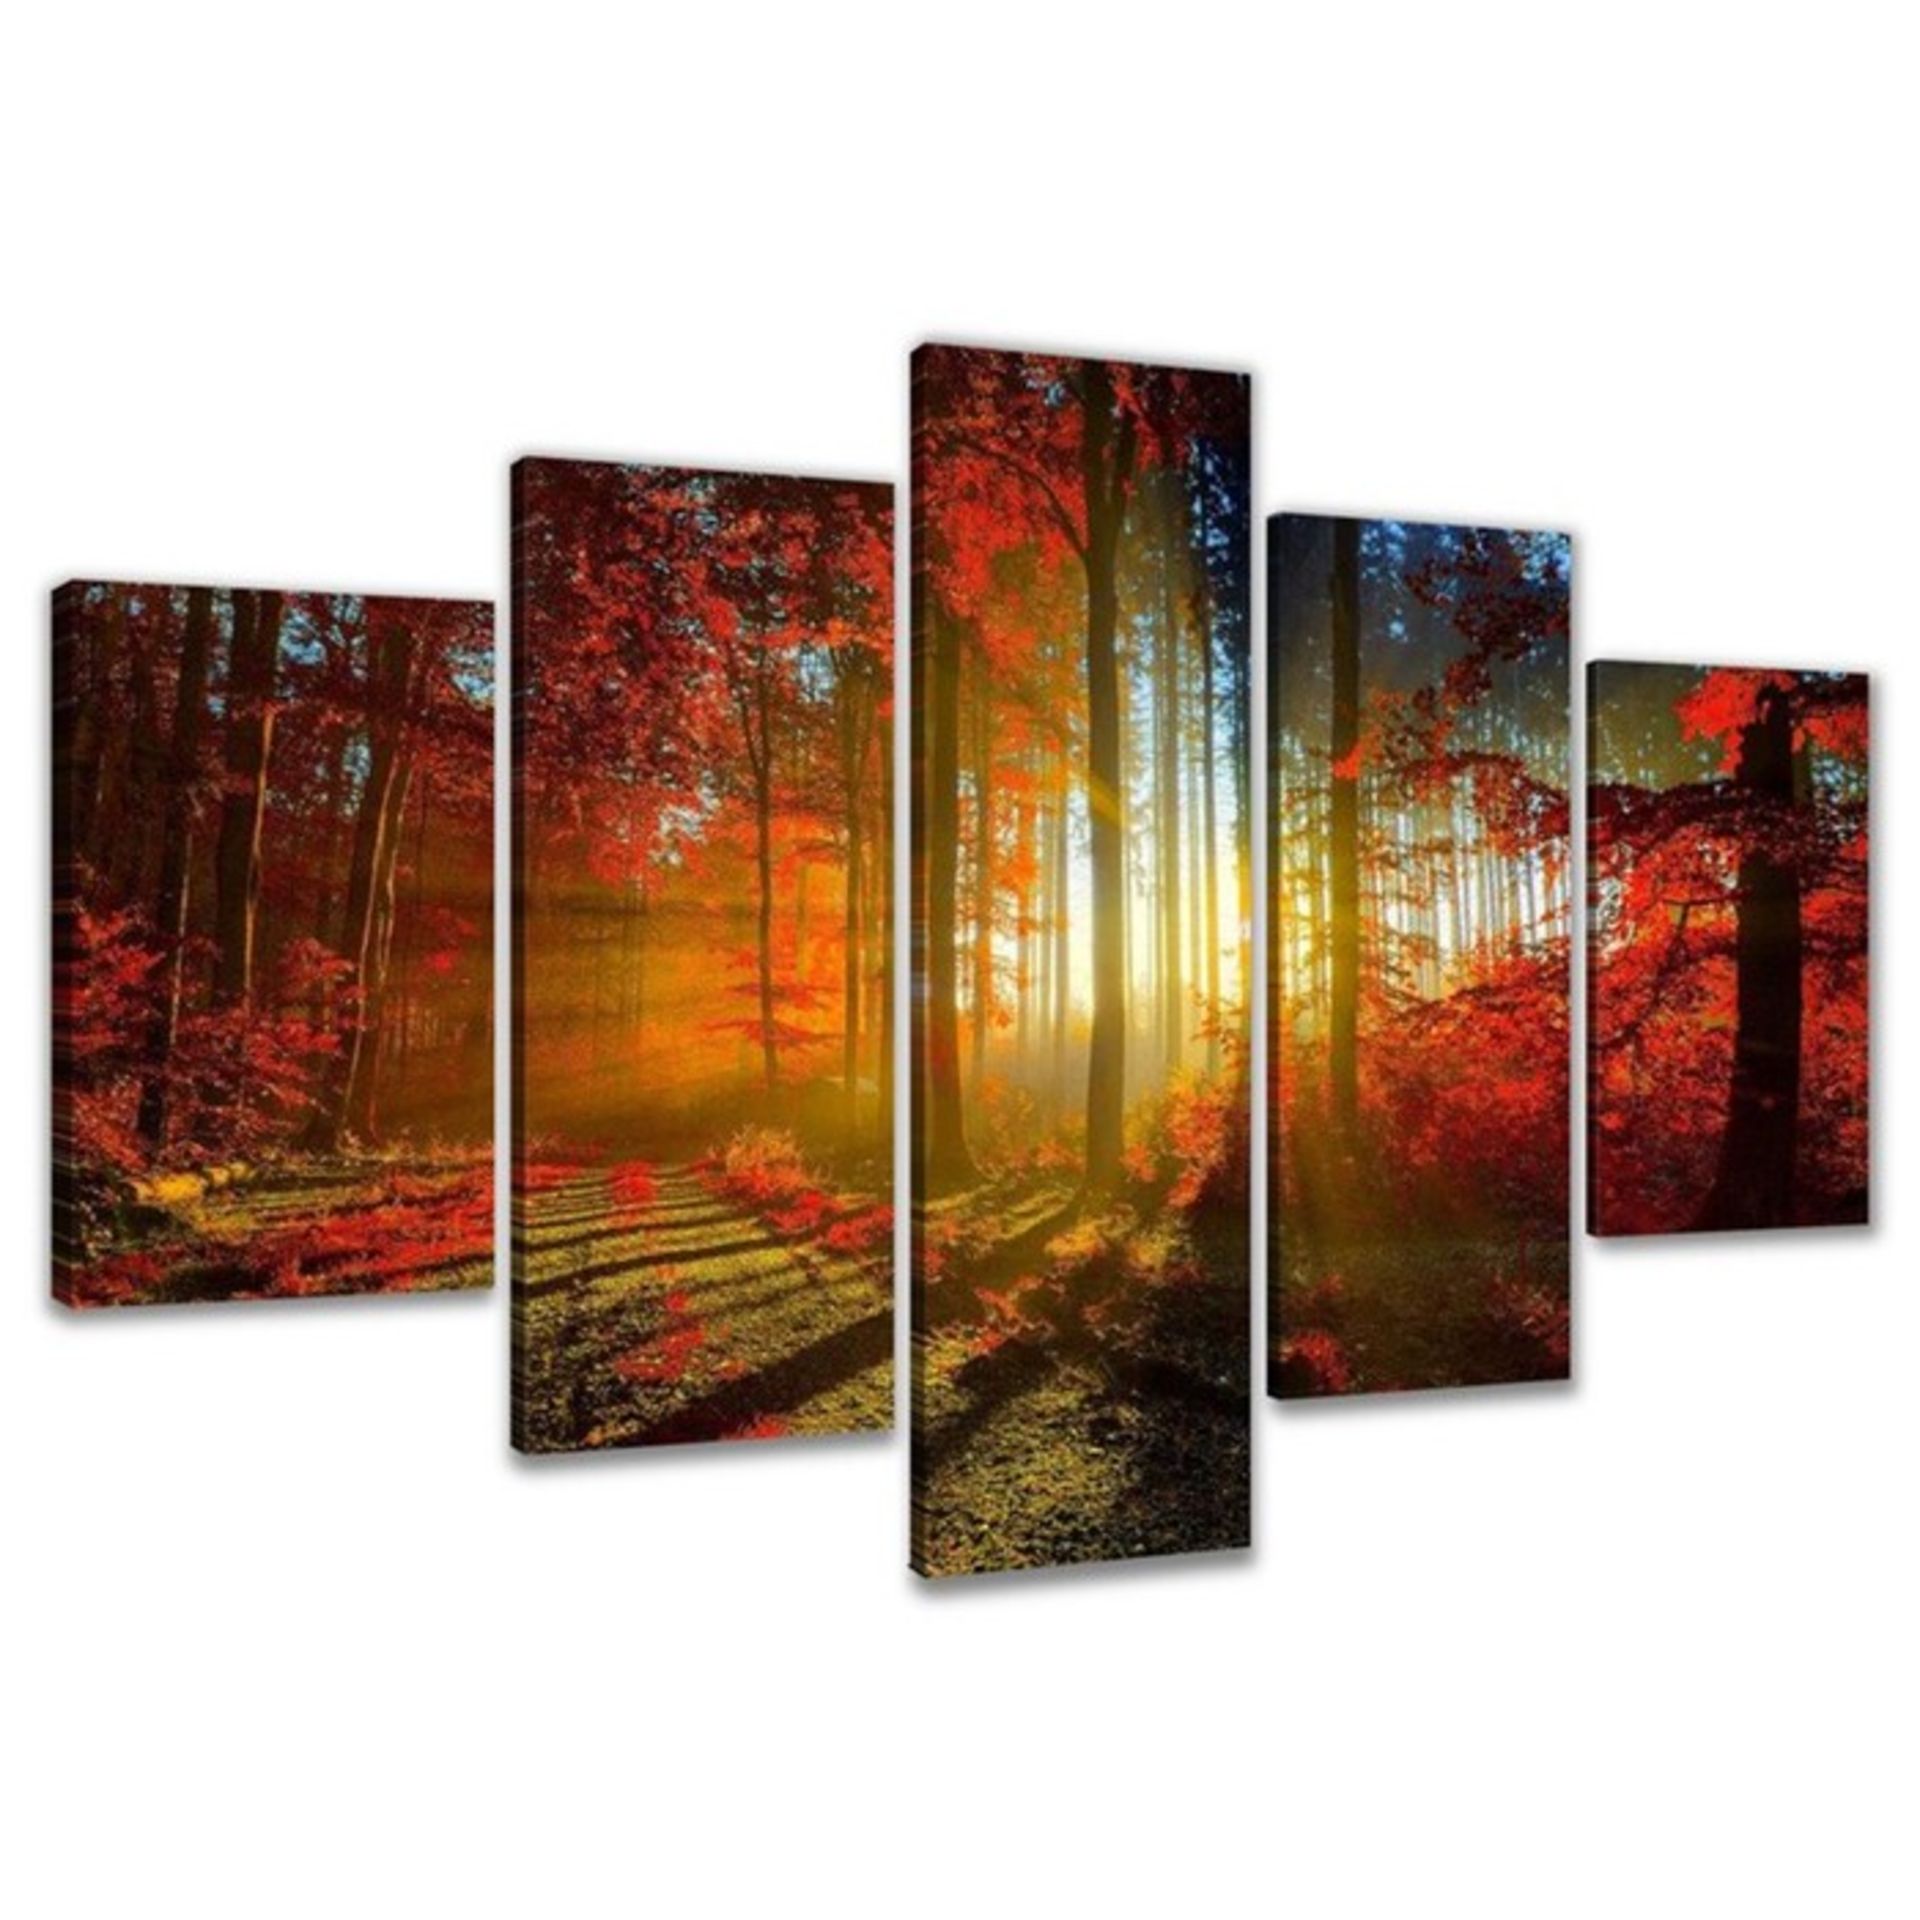 Urban Designs, 'Trees in Colourful Clearing' Multi-Piece Image Photographic Print on Canvas - RRP £